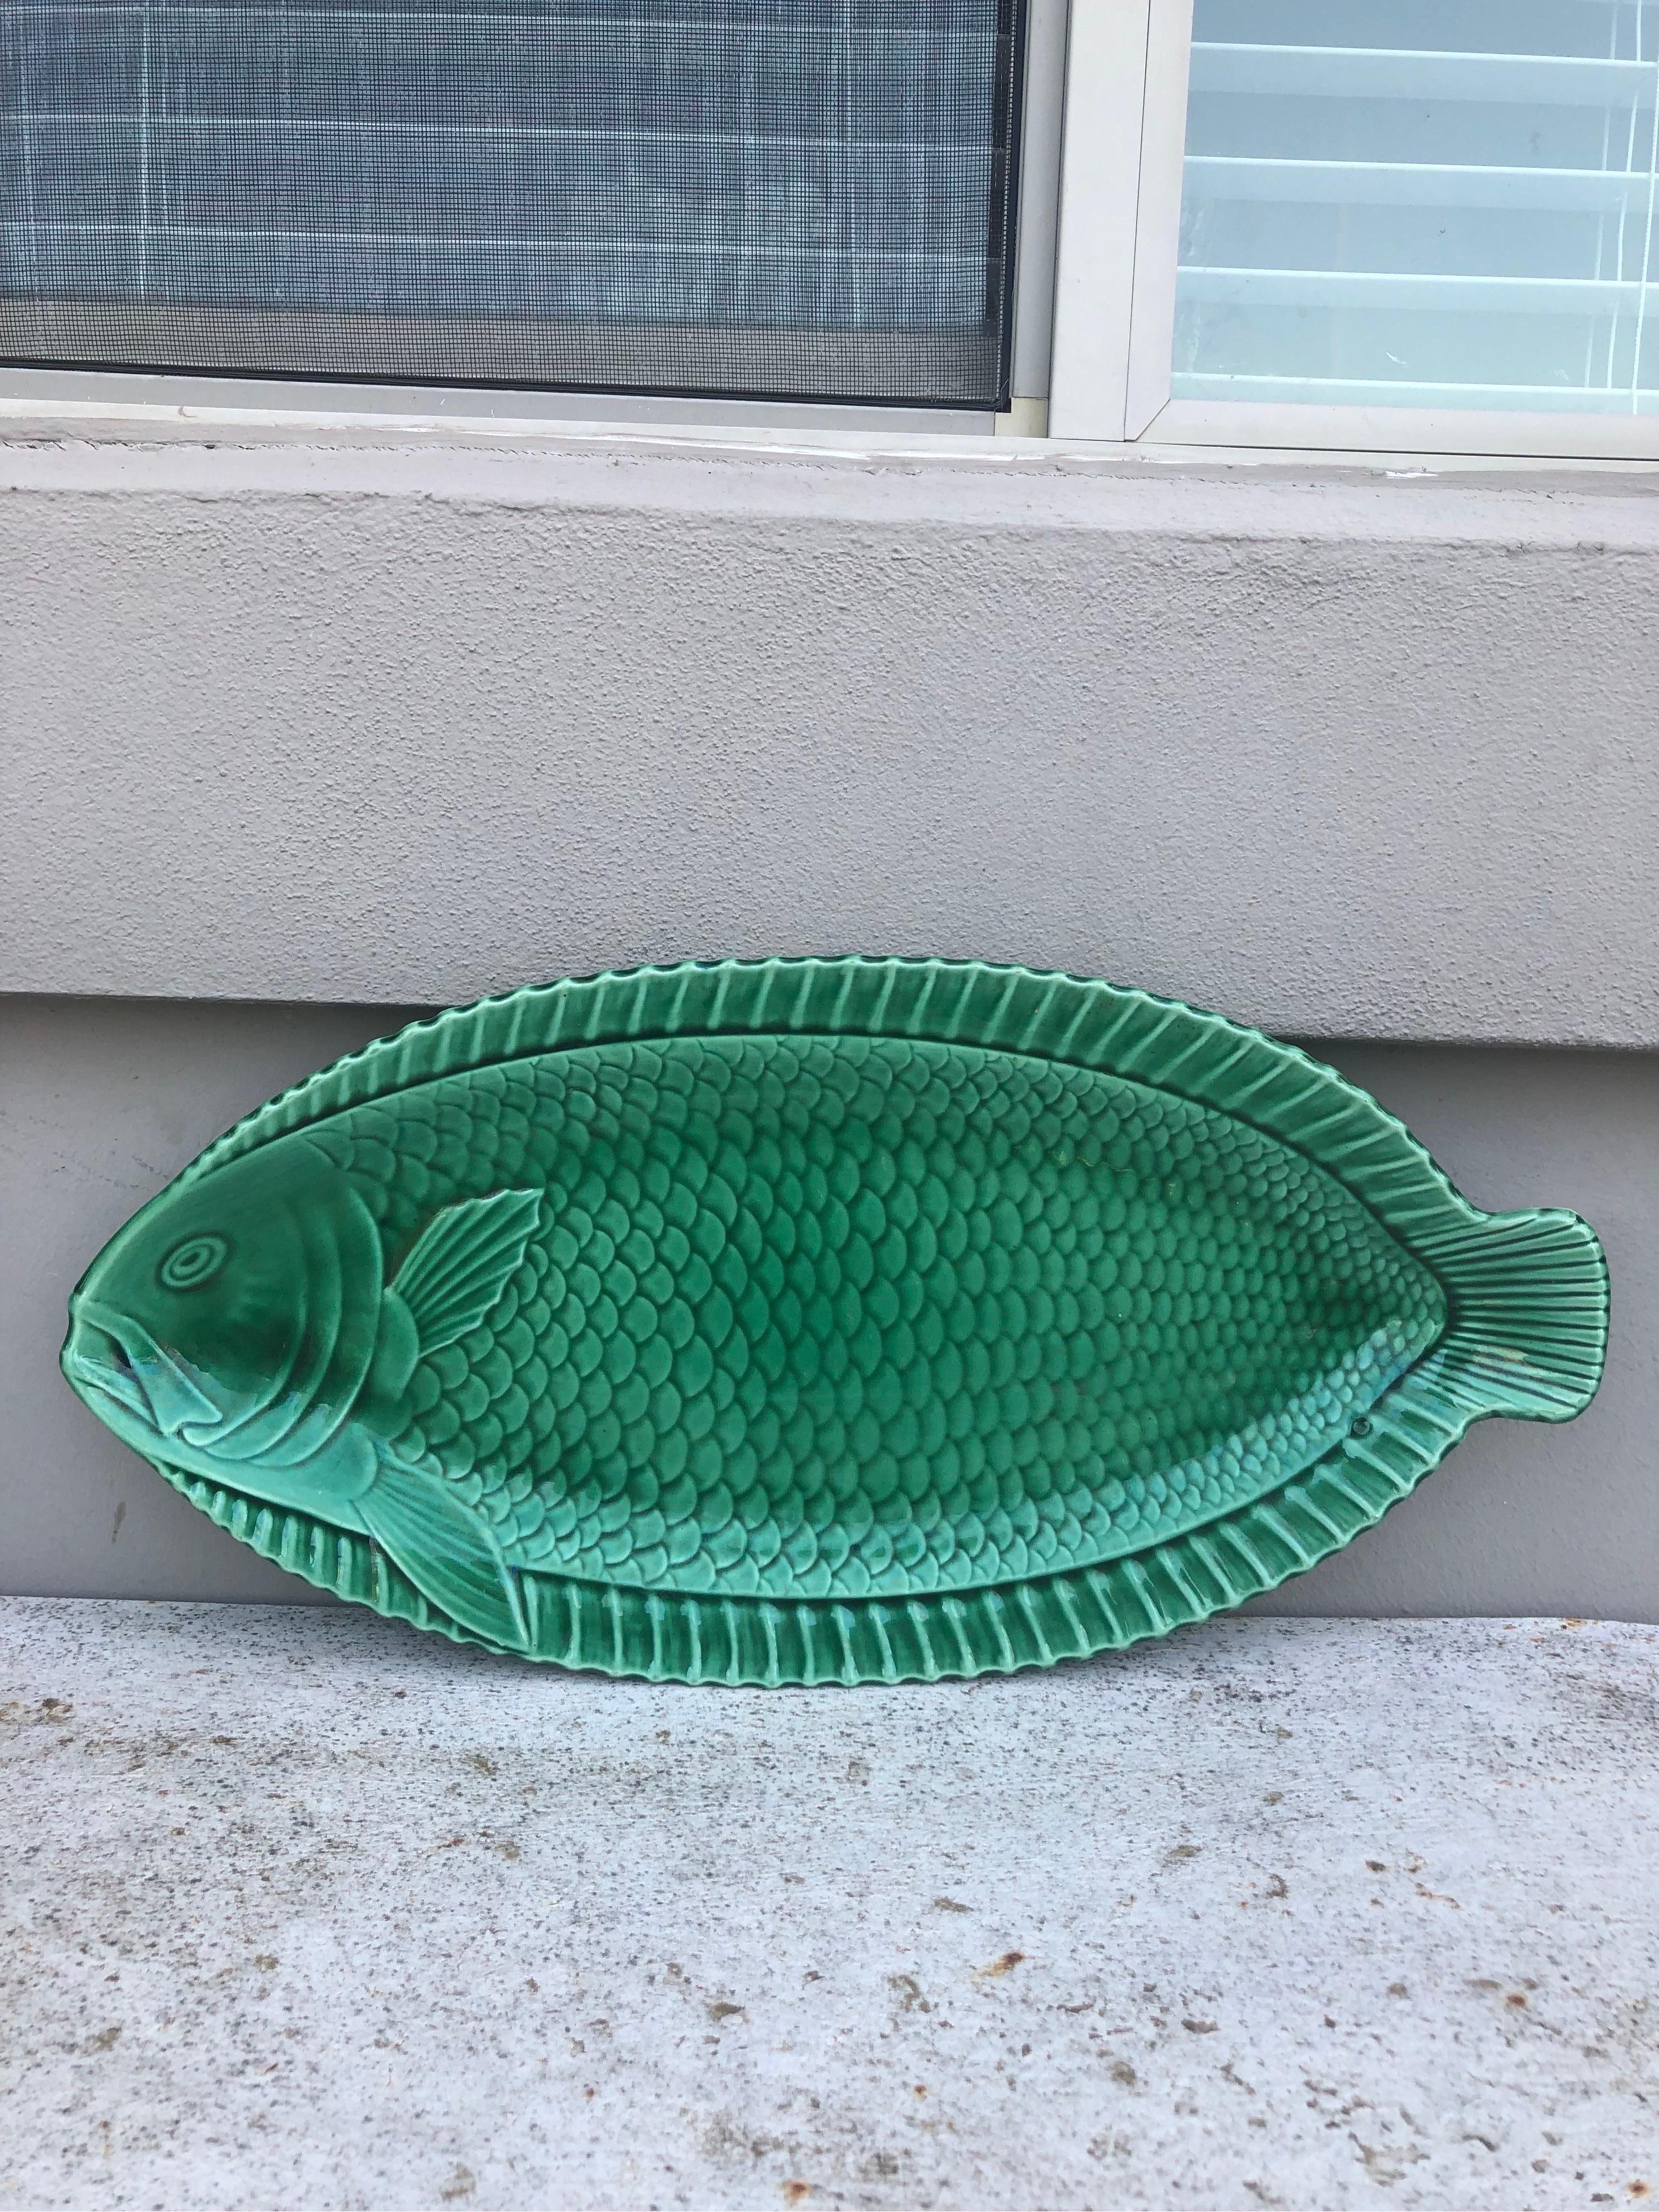 Large French Green Majolica fish platter signed Sarreguemines Circa 1930.
Measure: 21 inches Length.